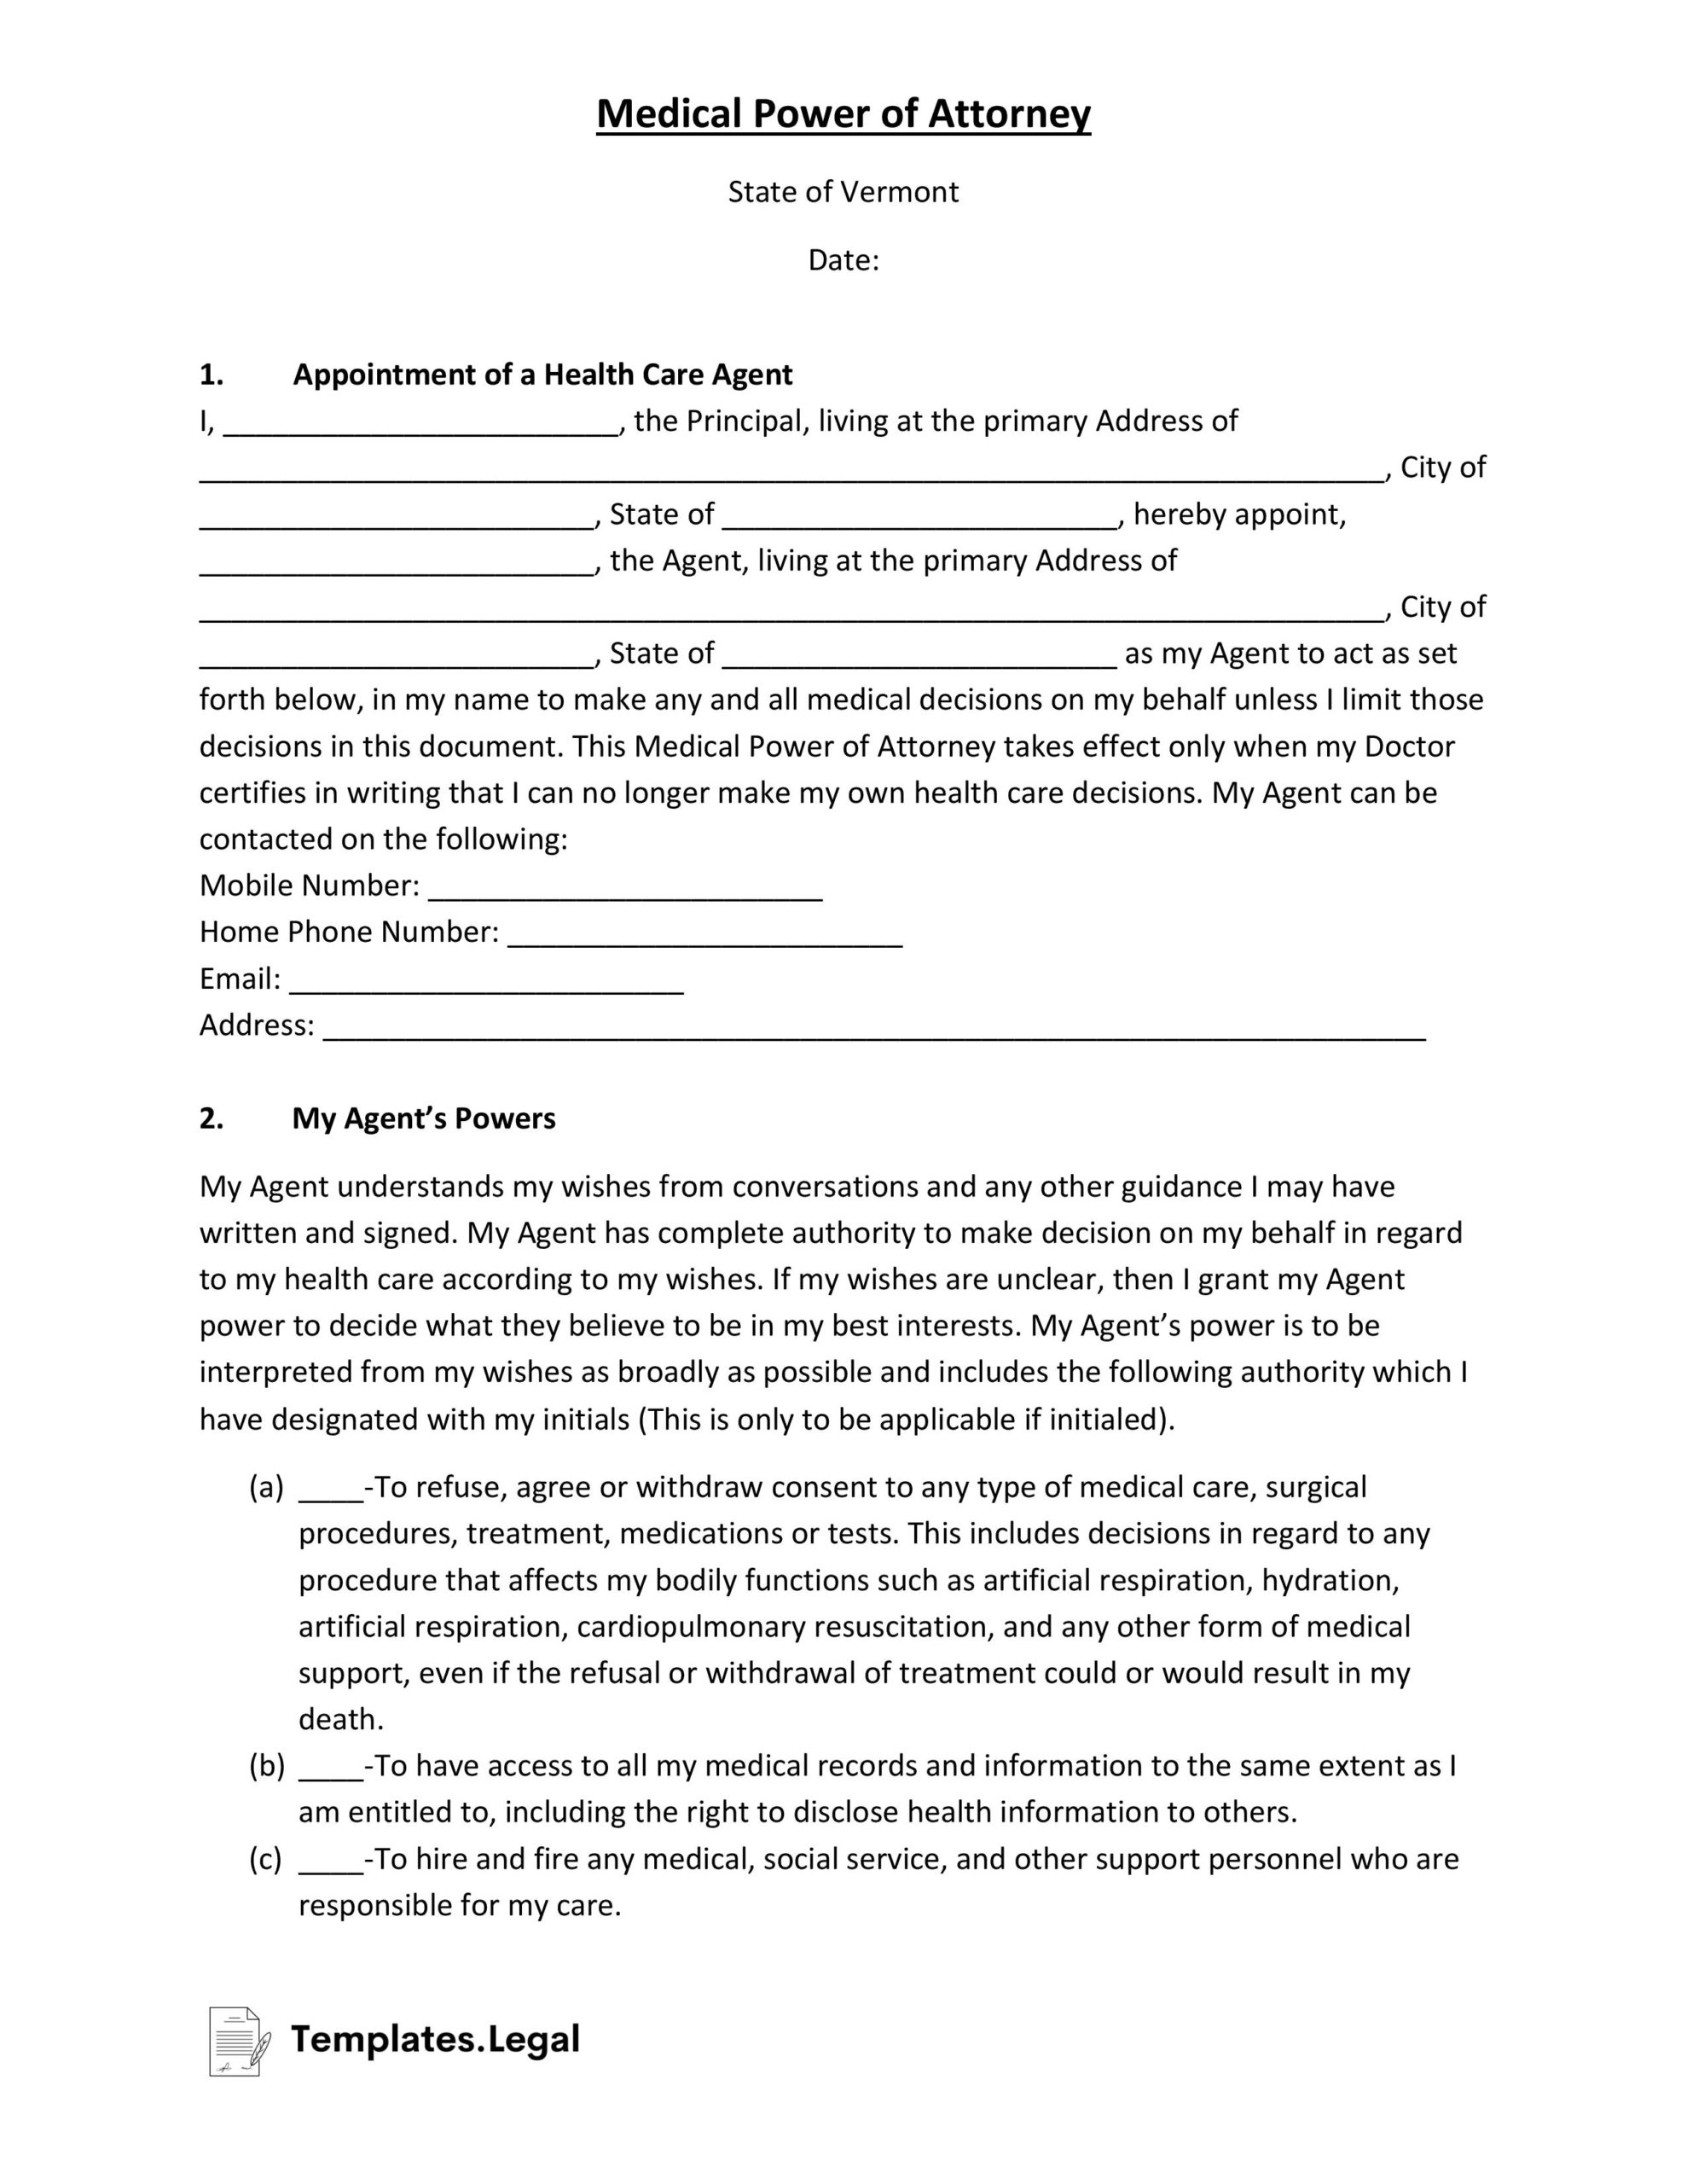 Vermont Medical Power of Attorney- Templates.Legal